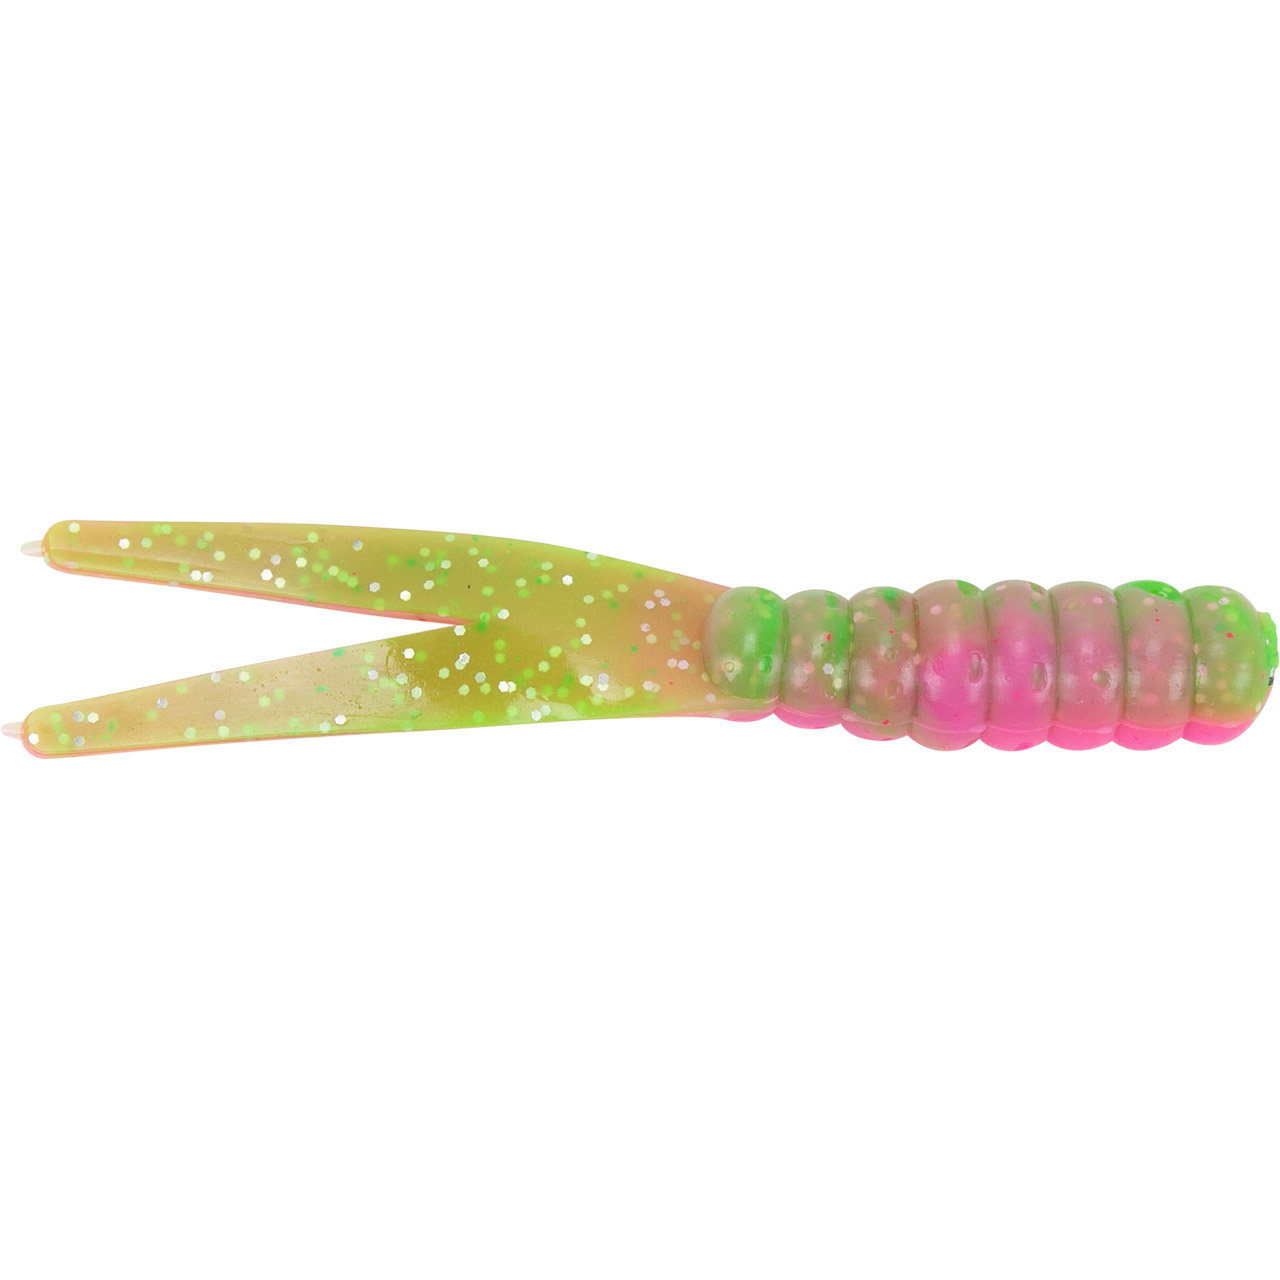 Stinger rigs for bigger soft lures by Darts